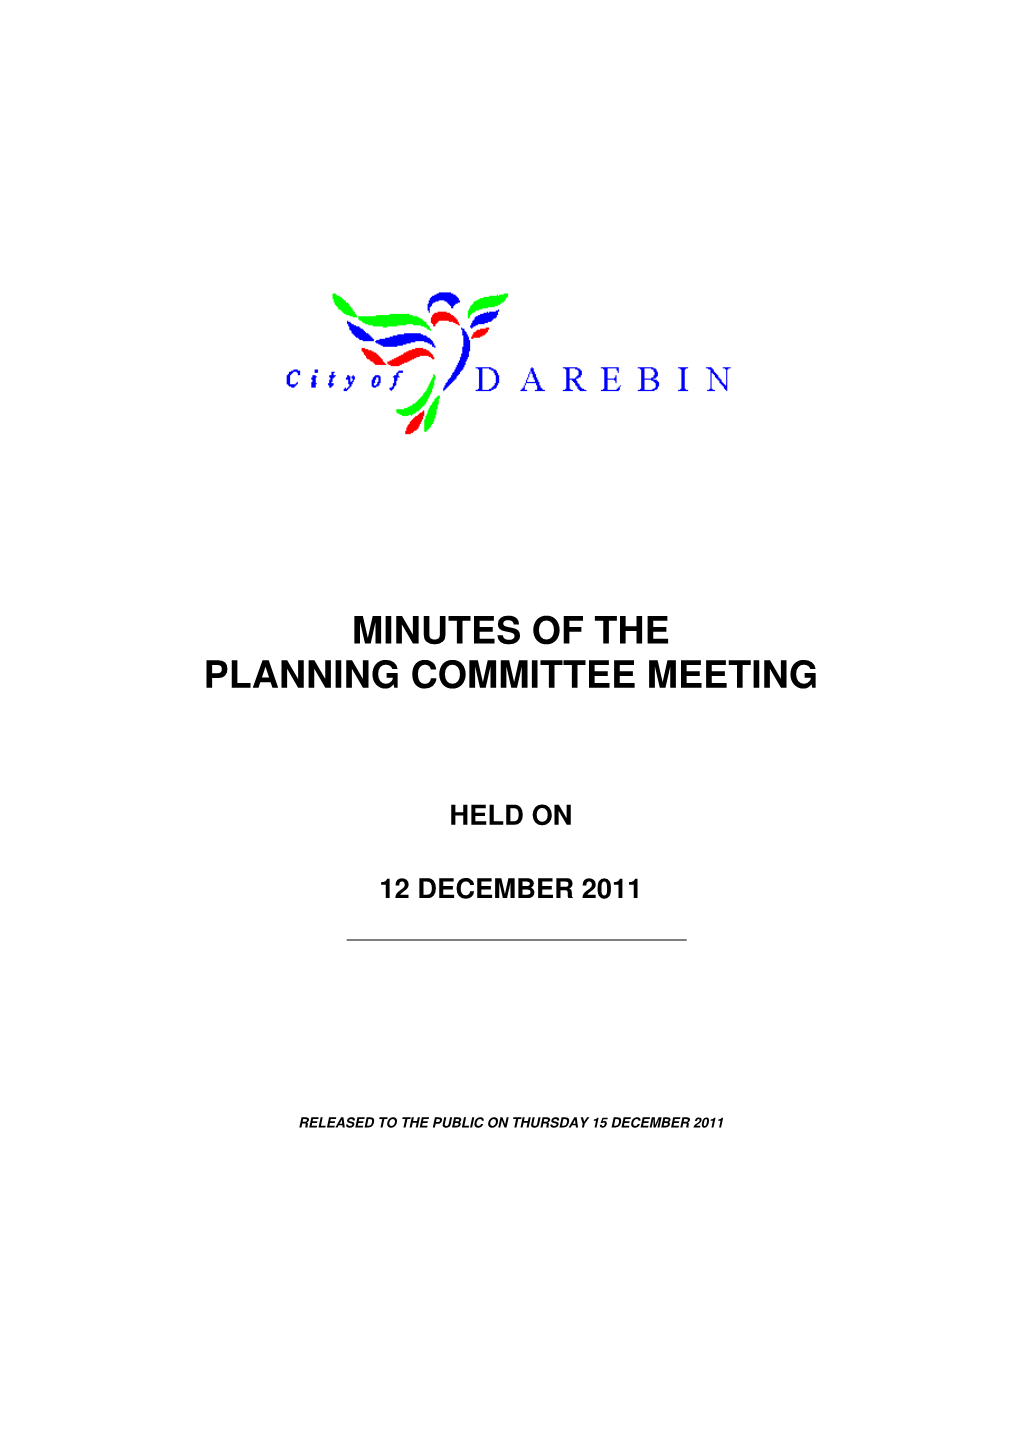 Minutes of the Planning Committee Meeting